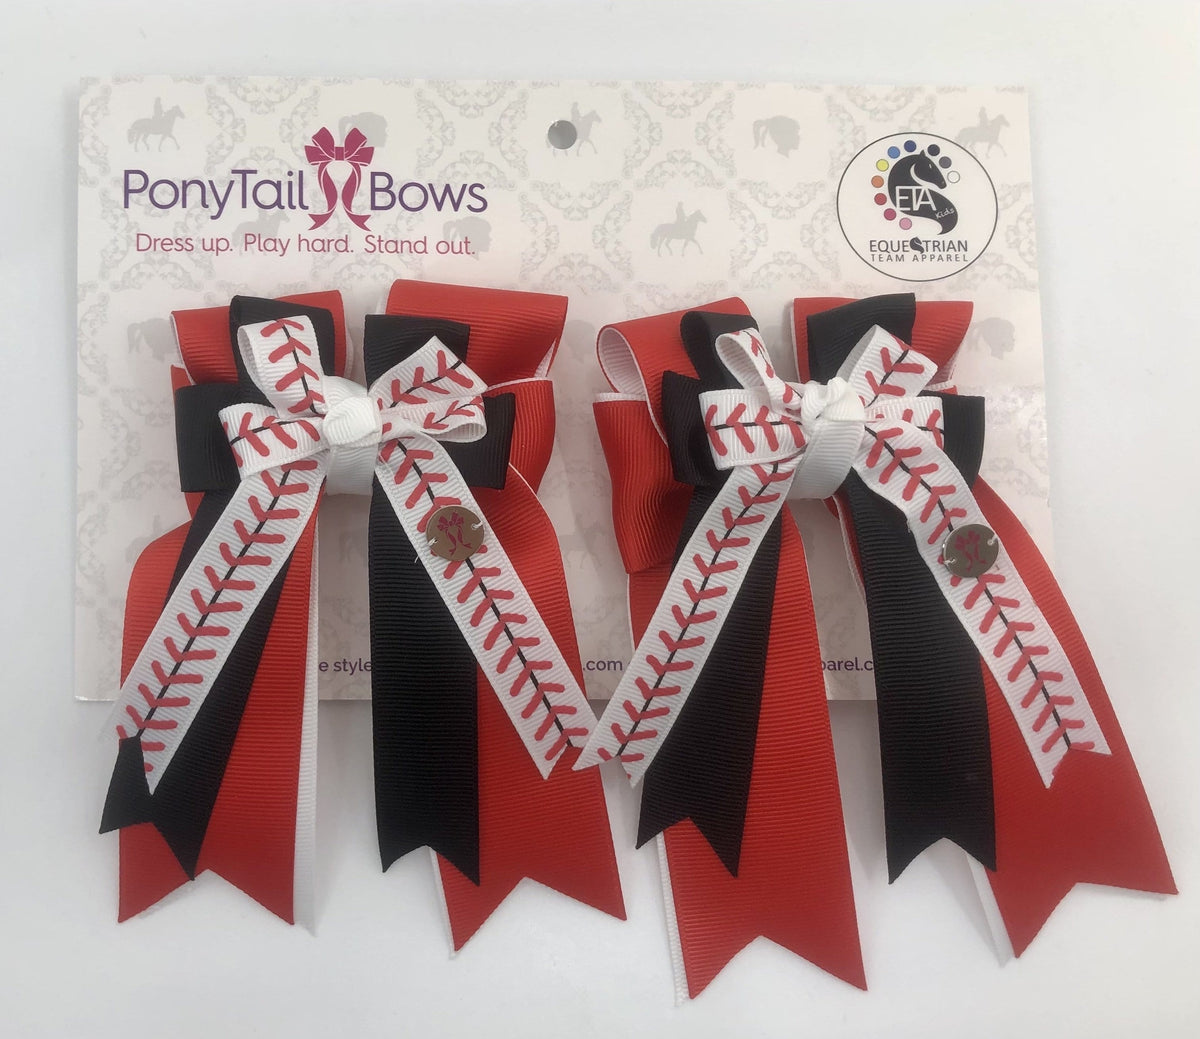 PonyTail Bows 3" Tails Baseball PonyTail Bows equestrian team apparel online tack store mobile tack store custom farm apparel custom show stable clothing equestrian lifestyle horse show clothing riding clothes PonyTail Bows | Equestrian Hair Accessories horses equestrian tack store